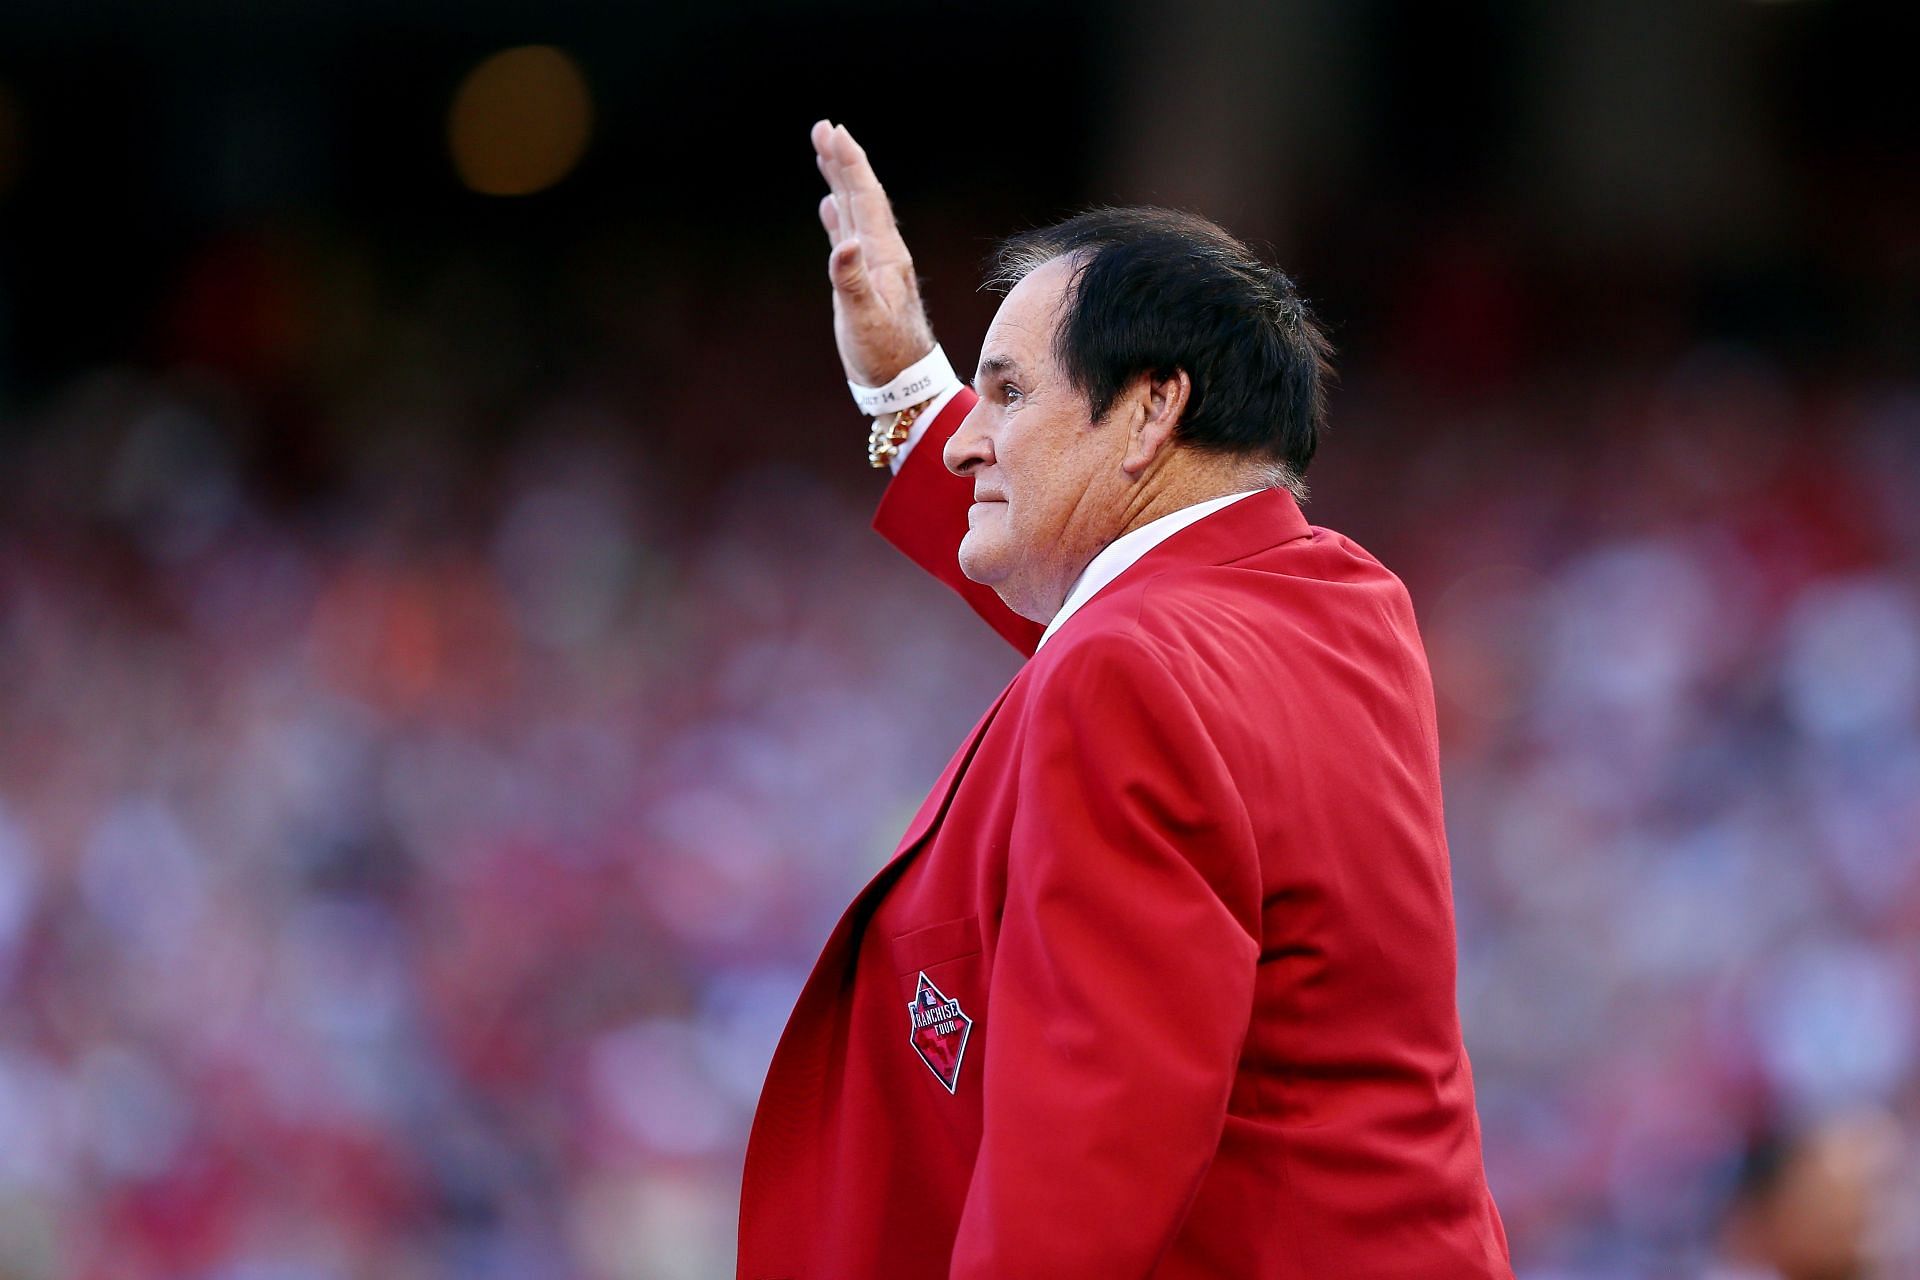 Pete Rose in the pre-game ceremonies of the 86th MLB All-Star Game